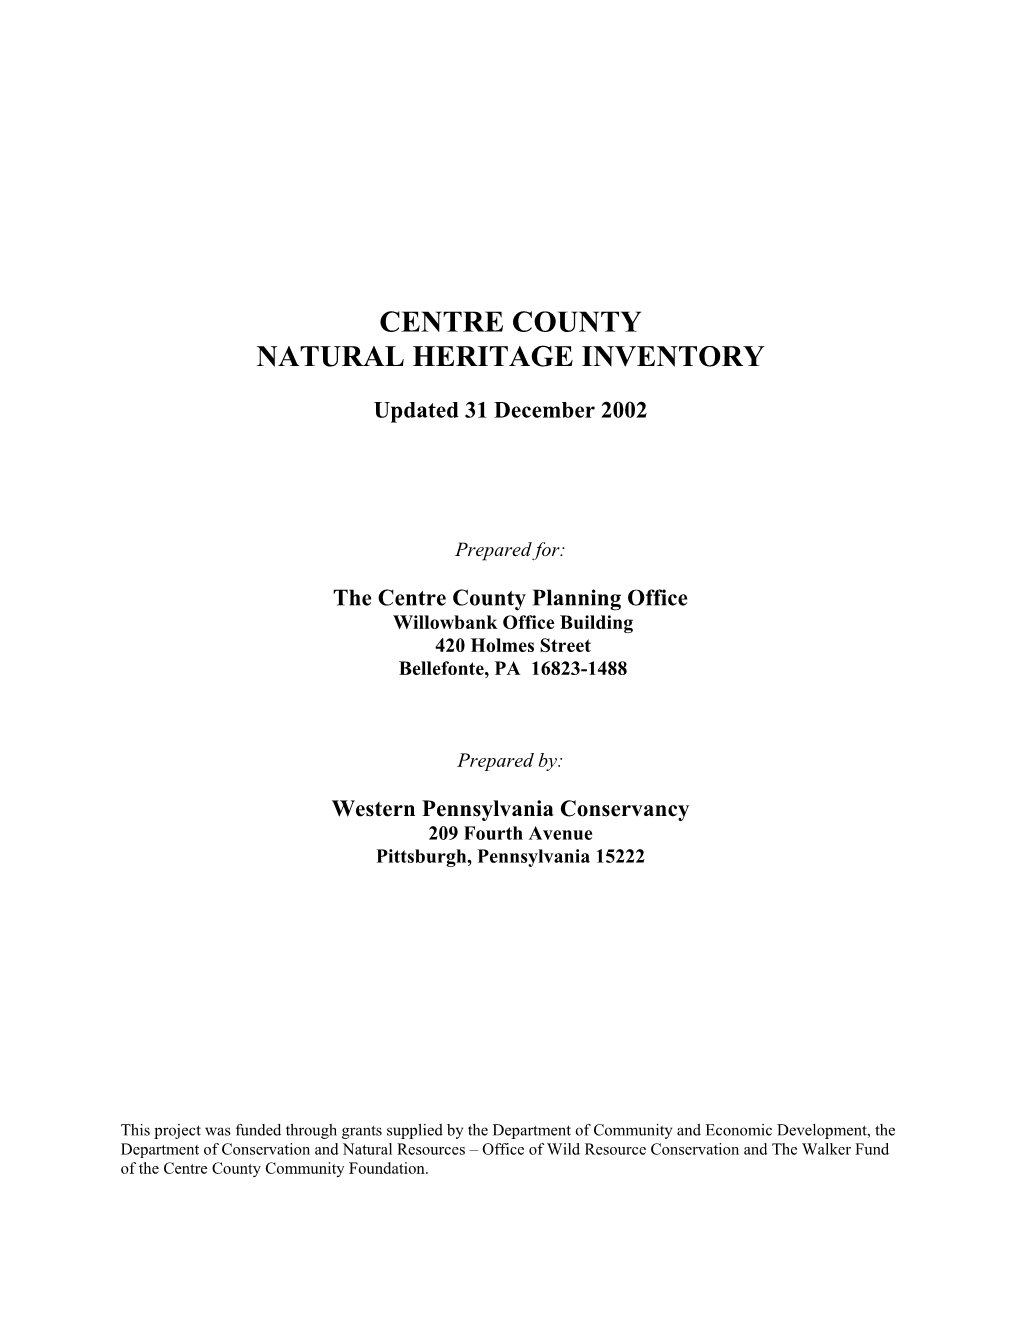 Centre County Natural Heritage Inventory, 2002